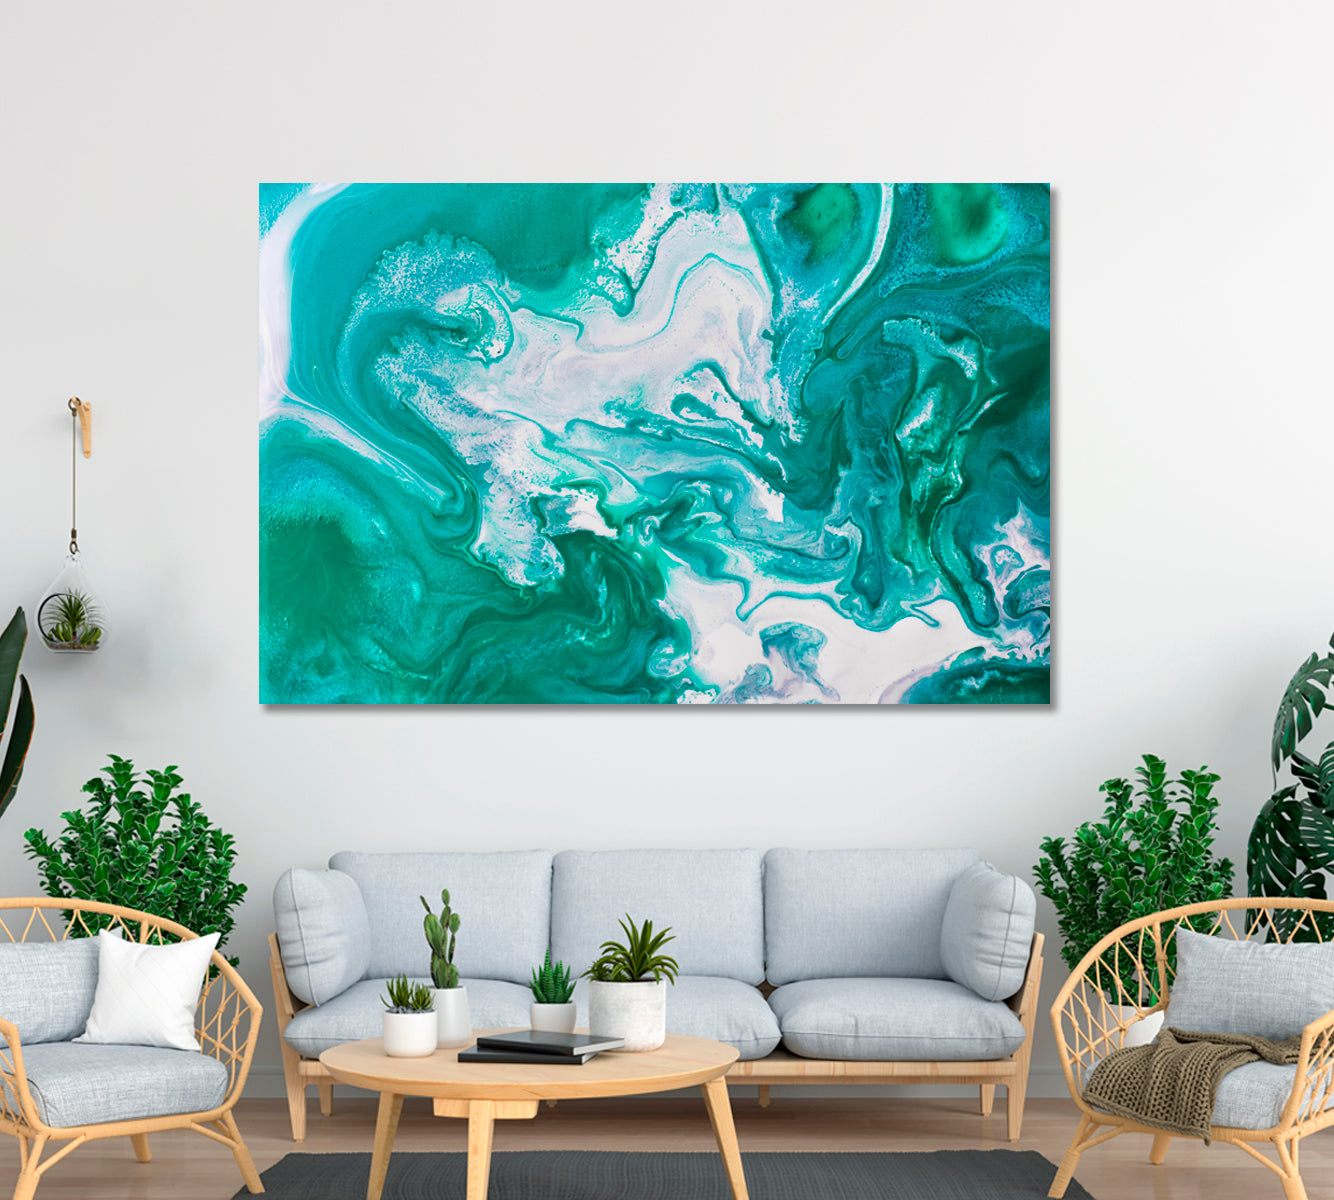 Abstract Turquoise Marble Pattern Canvas Print ArtLexy 1 Panel 24"x16" inches 